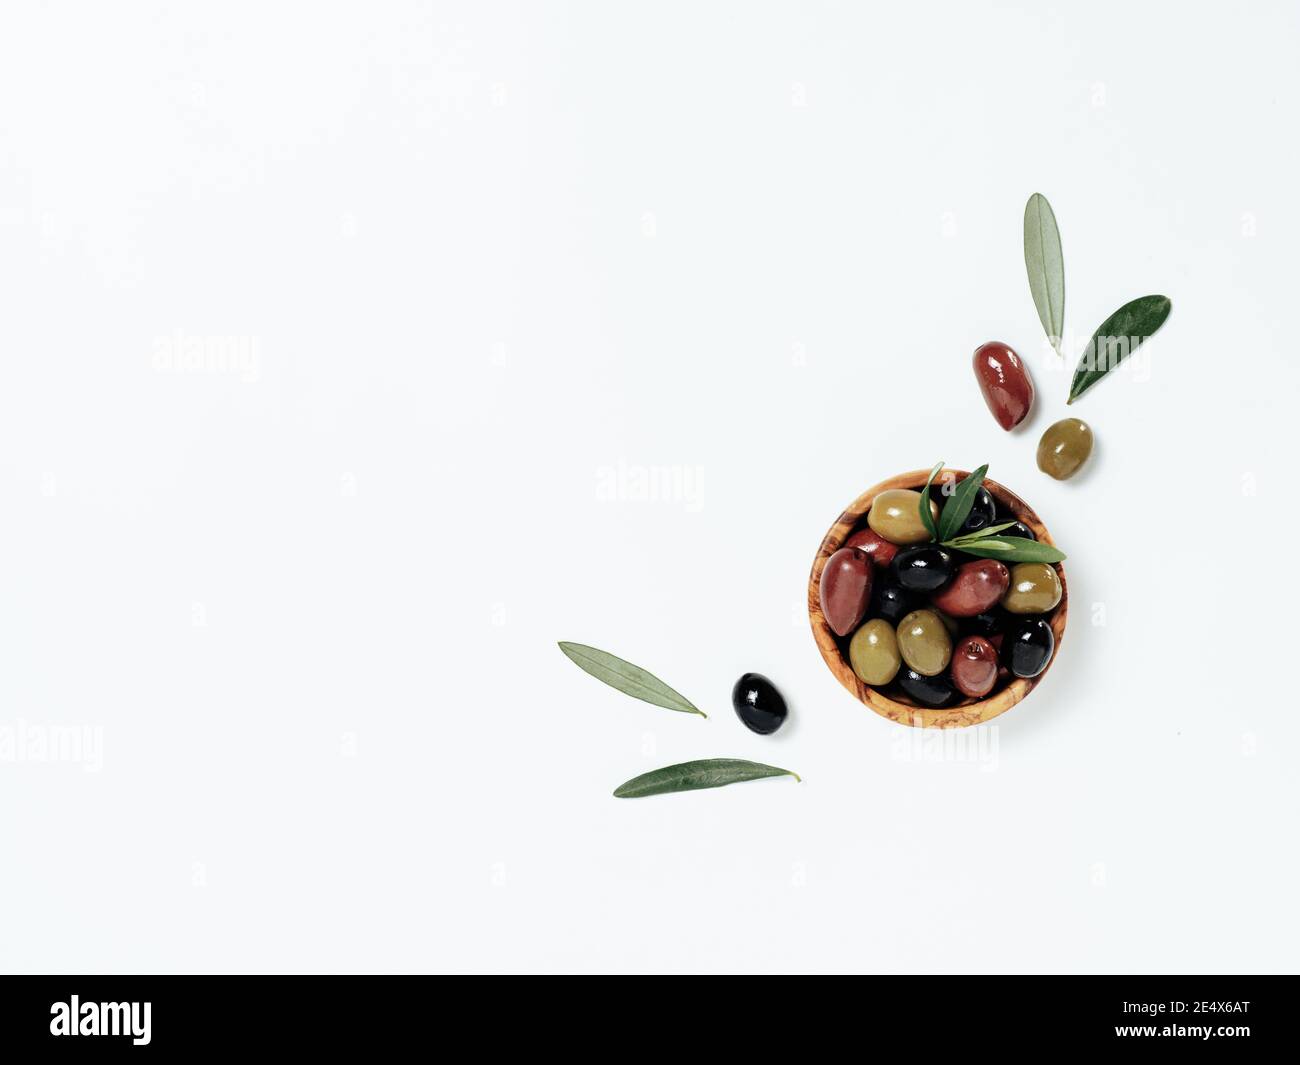 Olives tree leaves and fruits on white background. Small bowl with green, black and red kalamata olives, top view or flat lay. Olives isolated on white with copy space Stock Photo